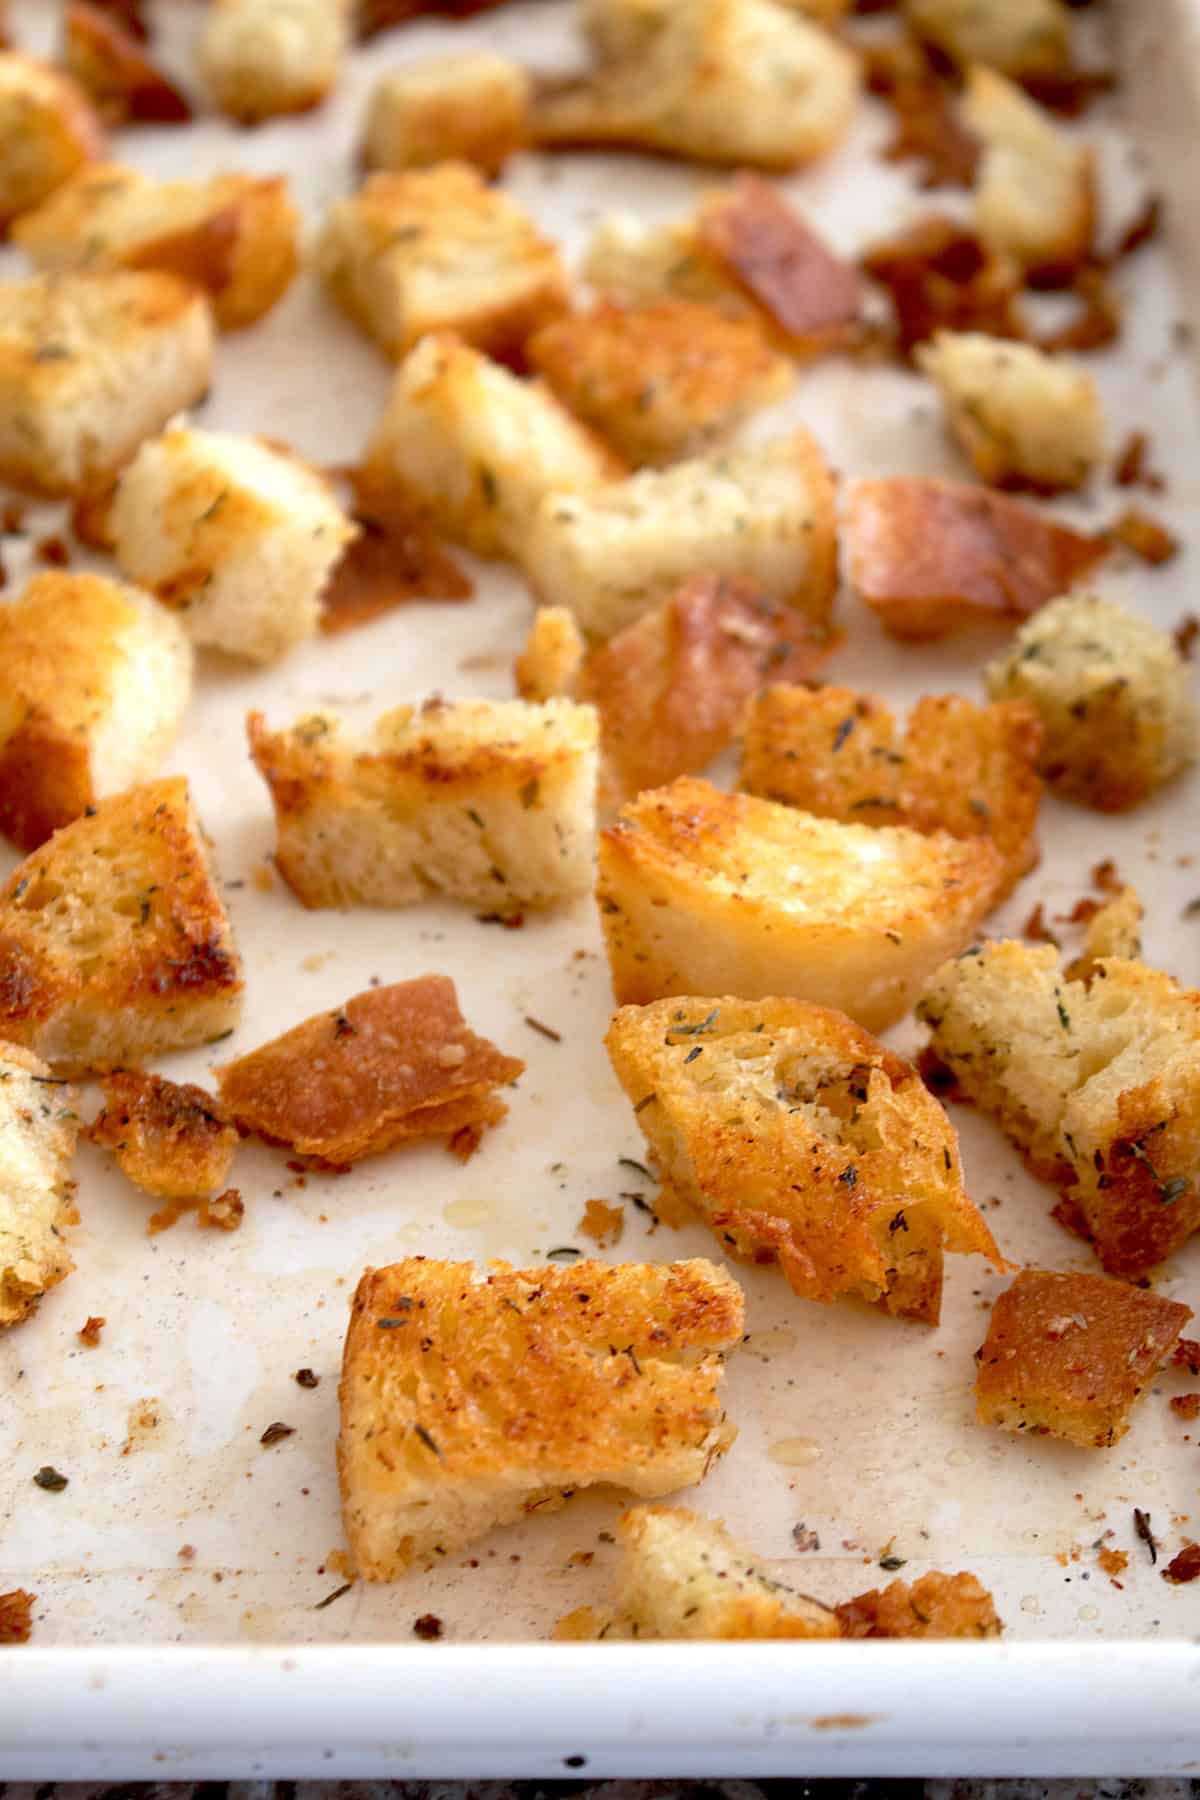 Homemade Croutons - How to Make Them